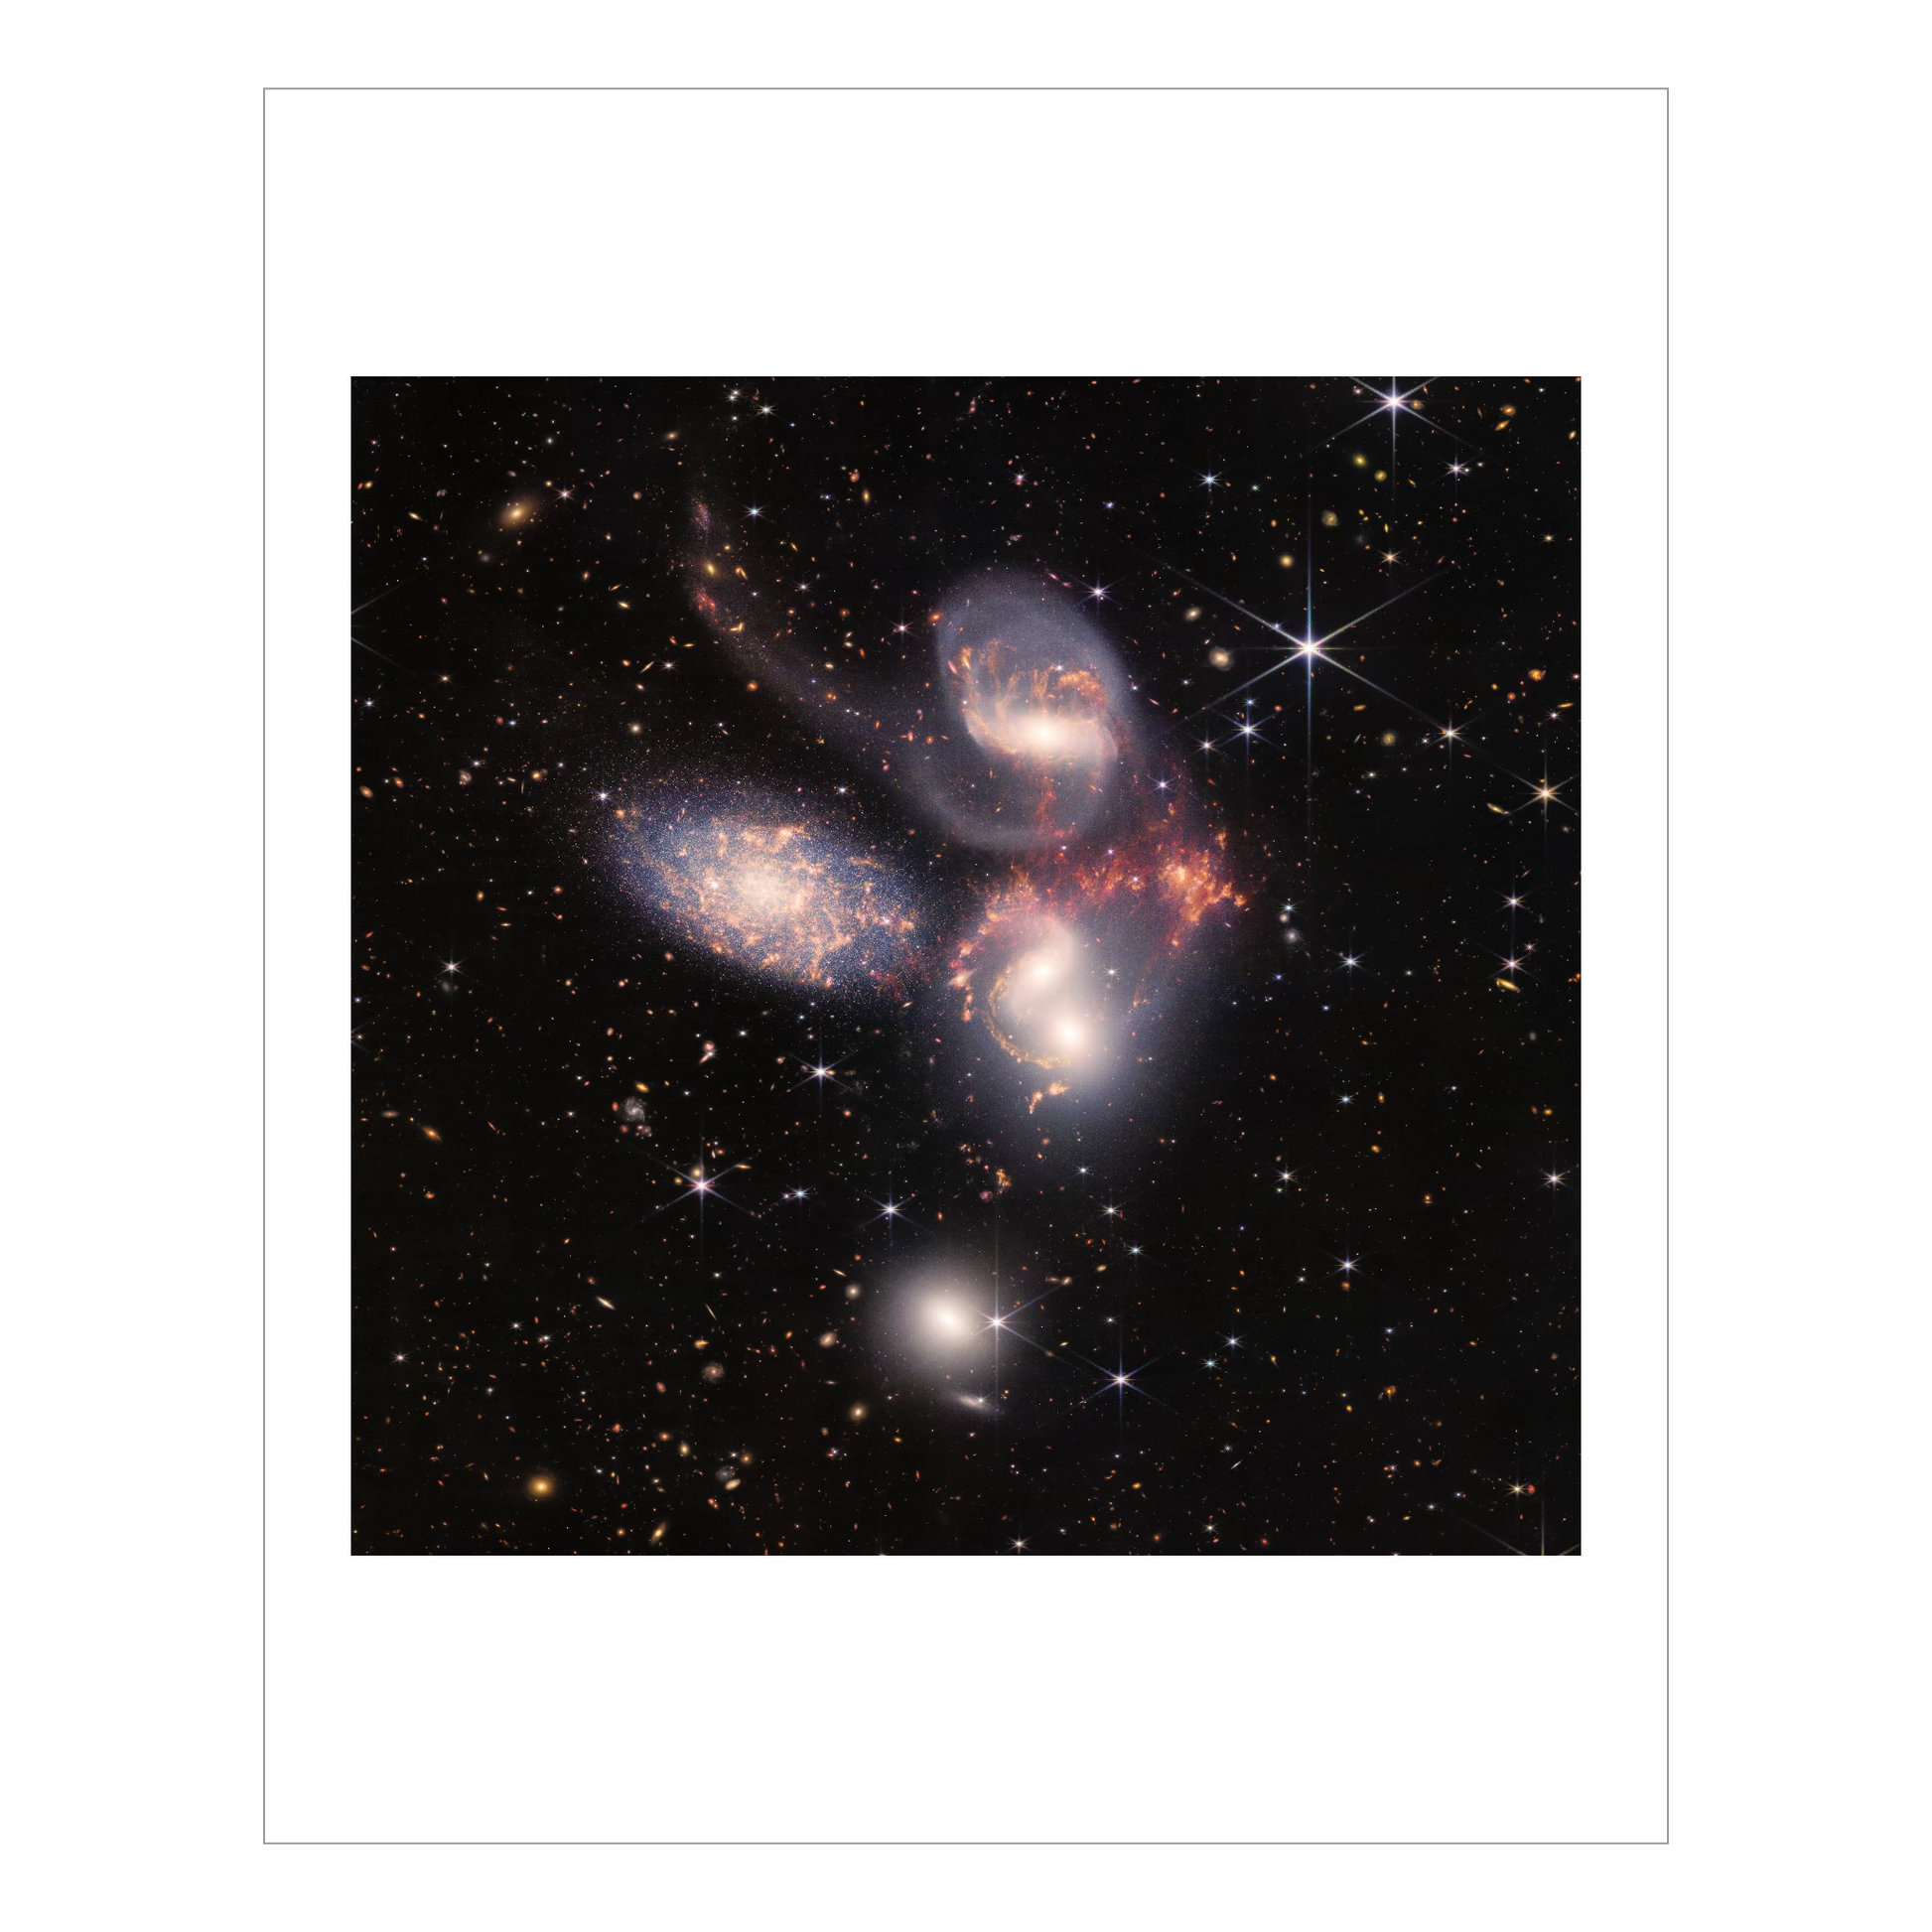 Stephan's Quintet composite image, 5 large nearby galaxies are shown, many further off in the distance.